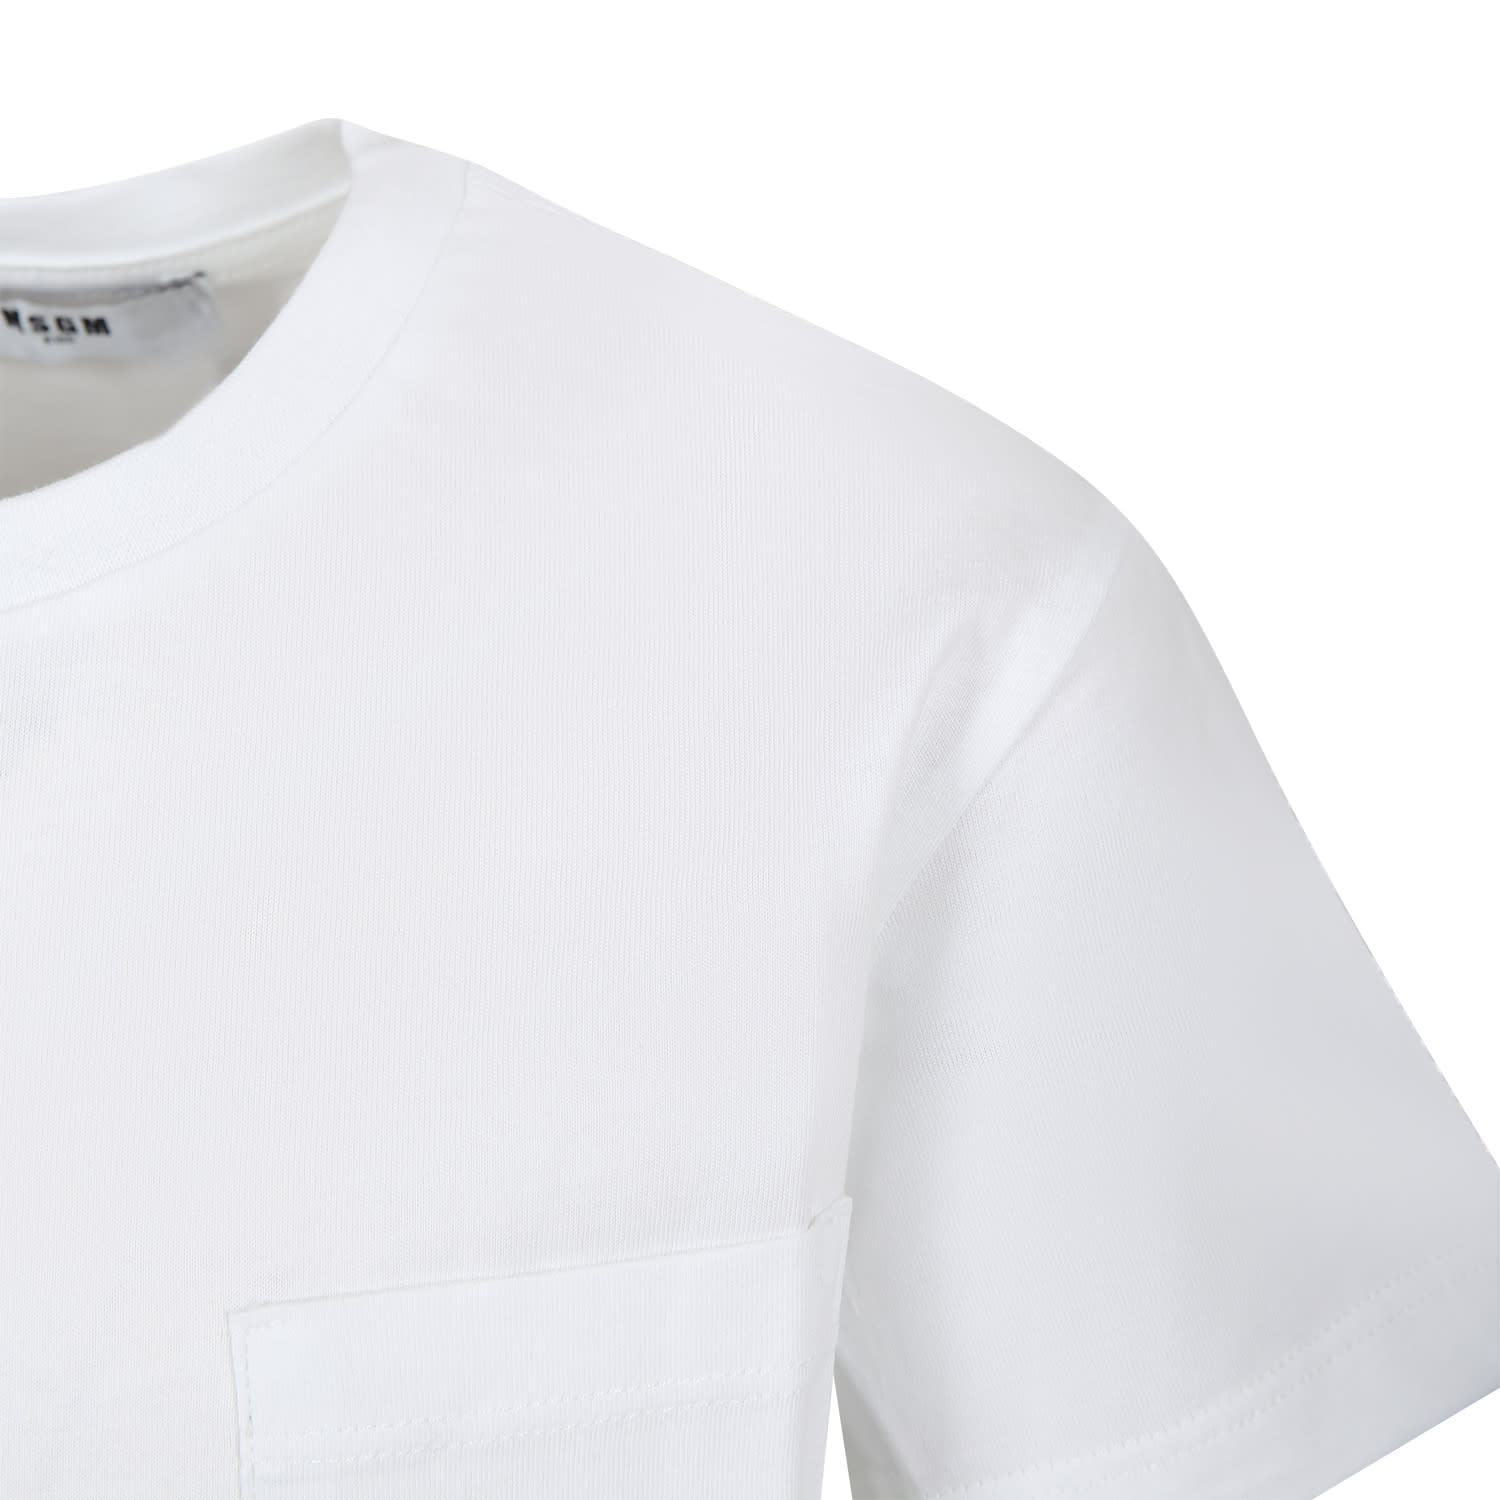 Shop Msgm White T-shirt For Boy With Logo